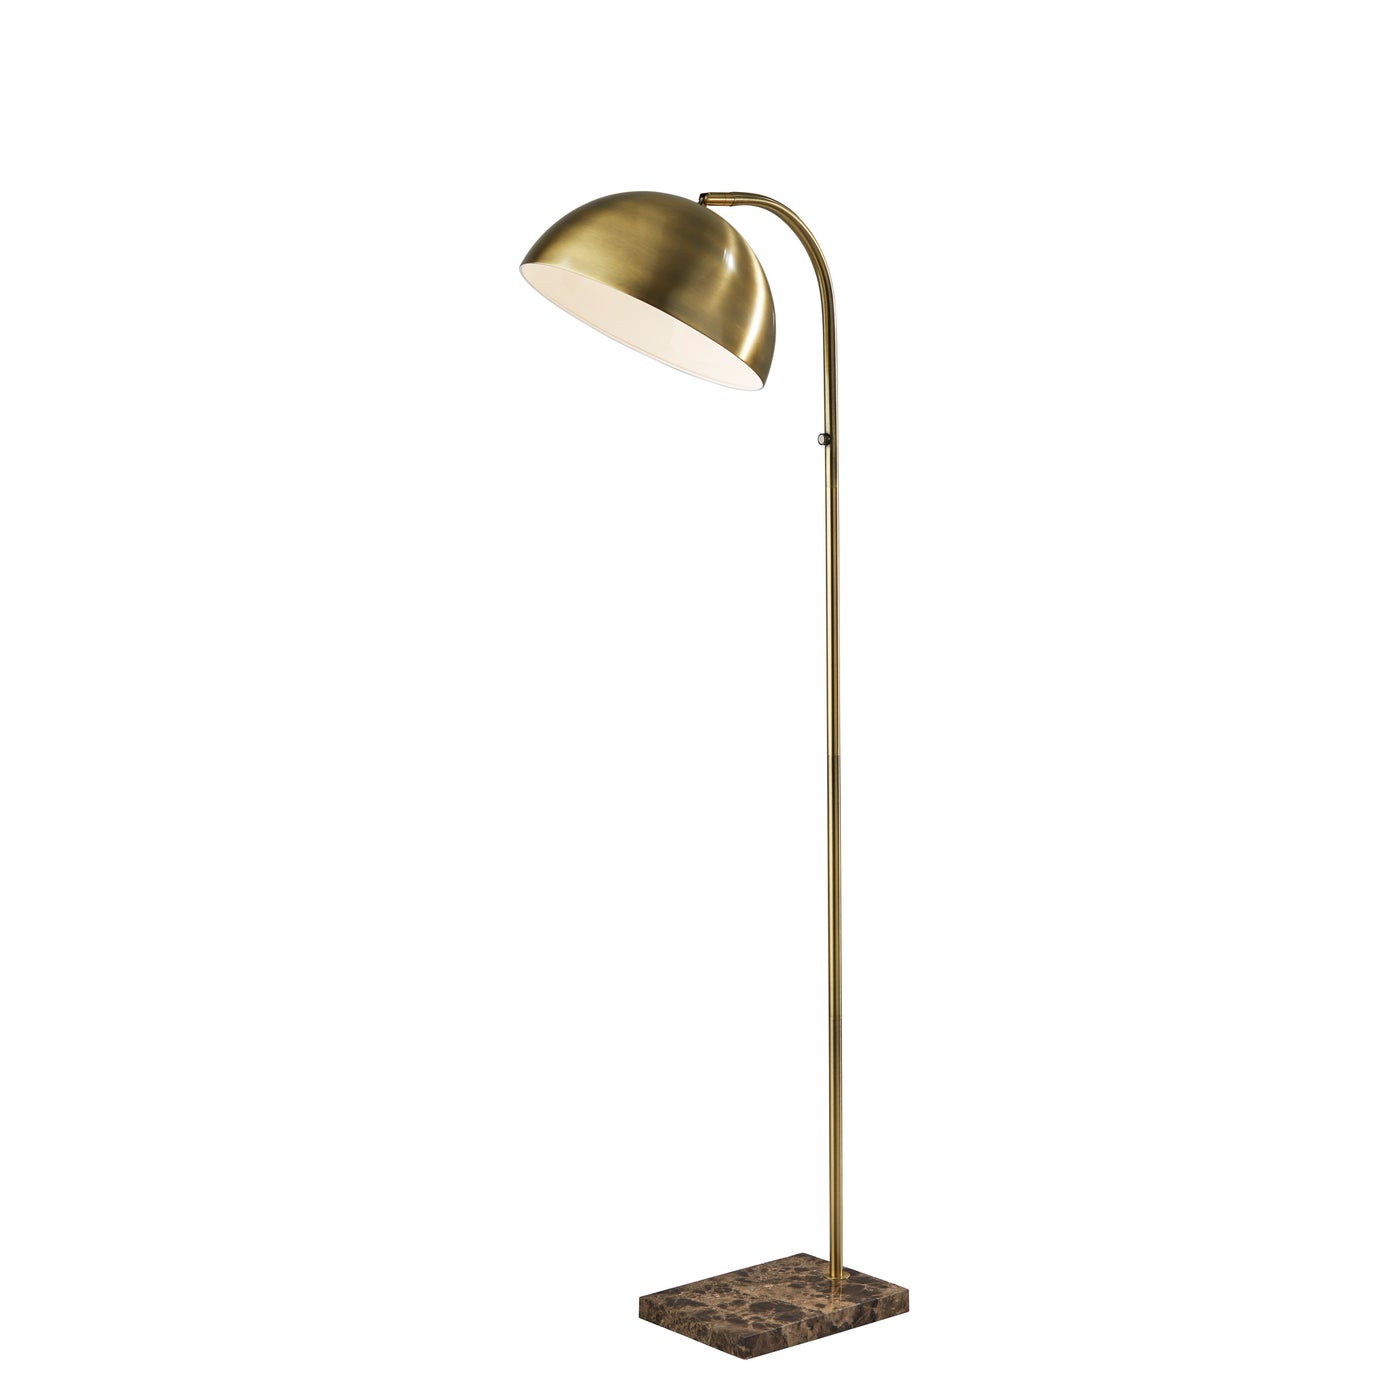 Adesso Home - 3479-21 - Floor Lamp - Paxton - Antique Brass